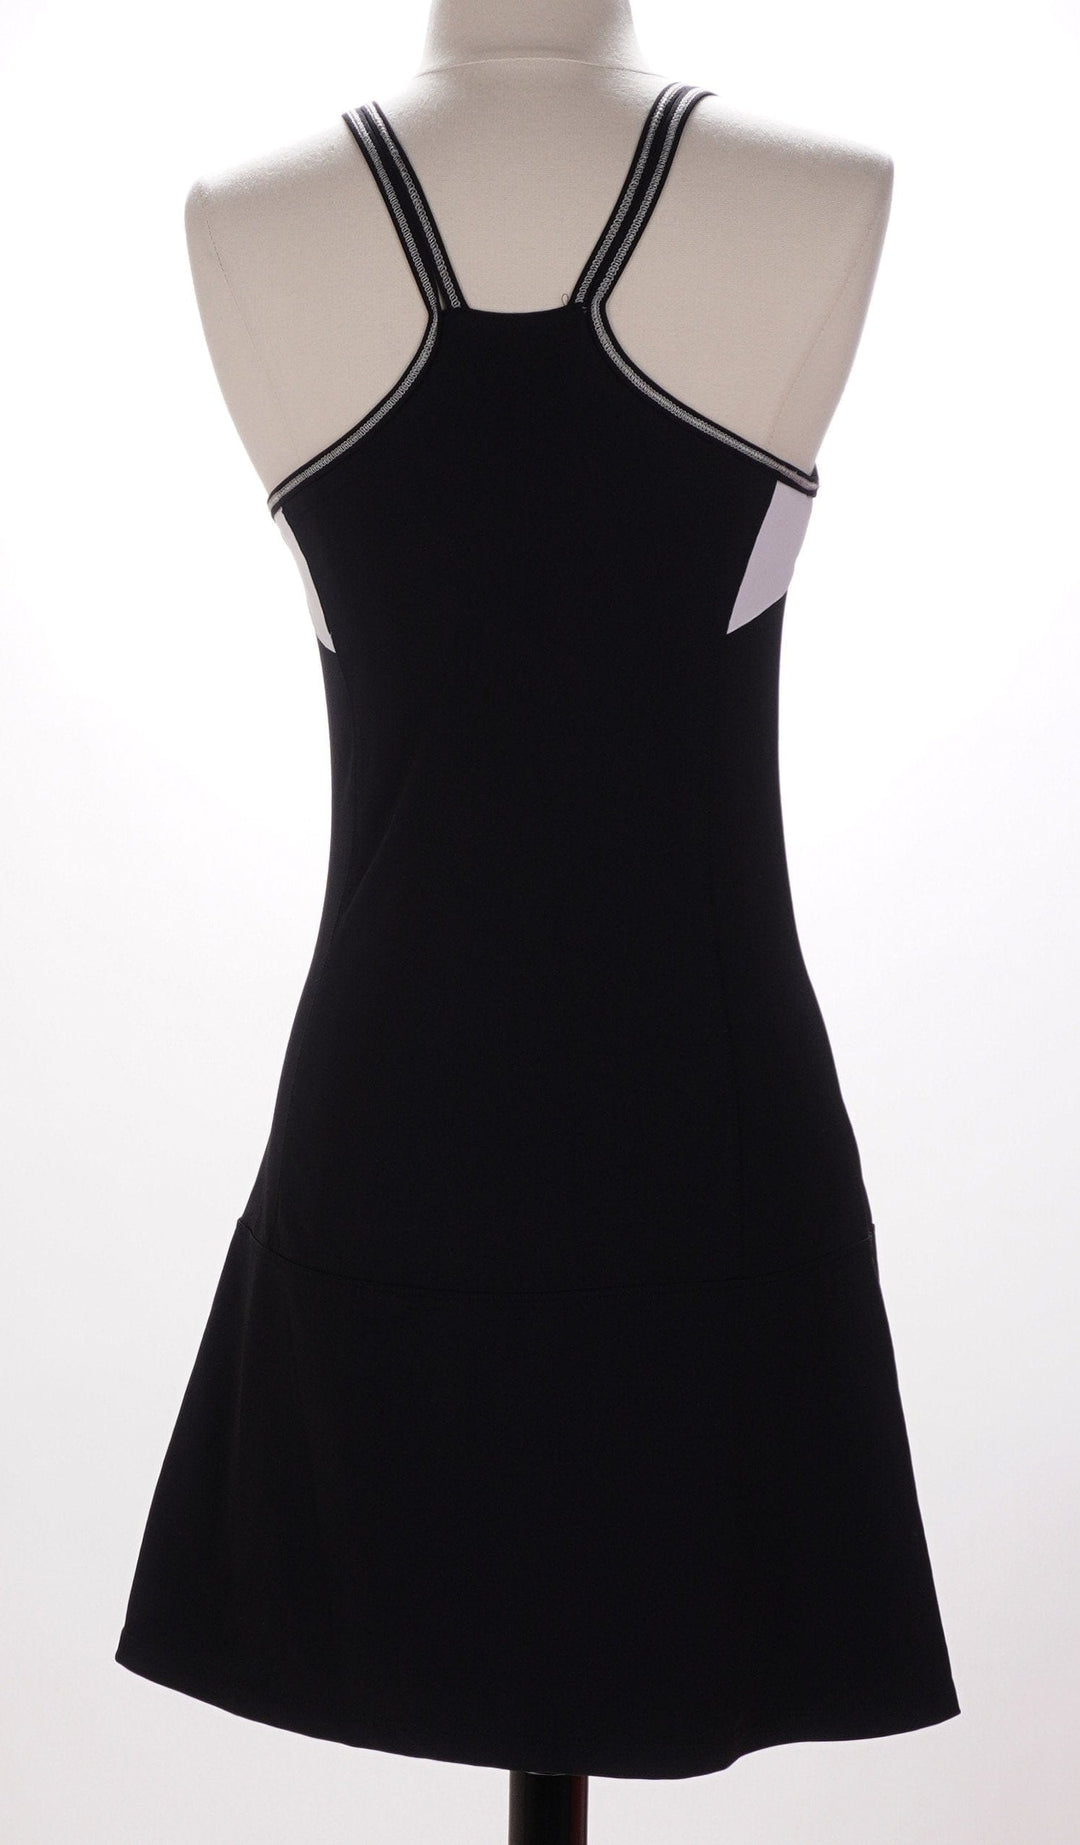 Tail X-Small / Black / Consigned Tail Golf Dress - Black-White-Pink - Size X-Small